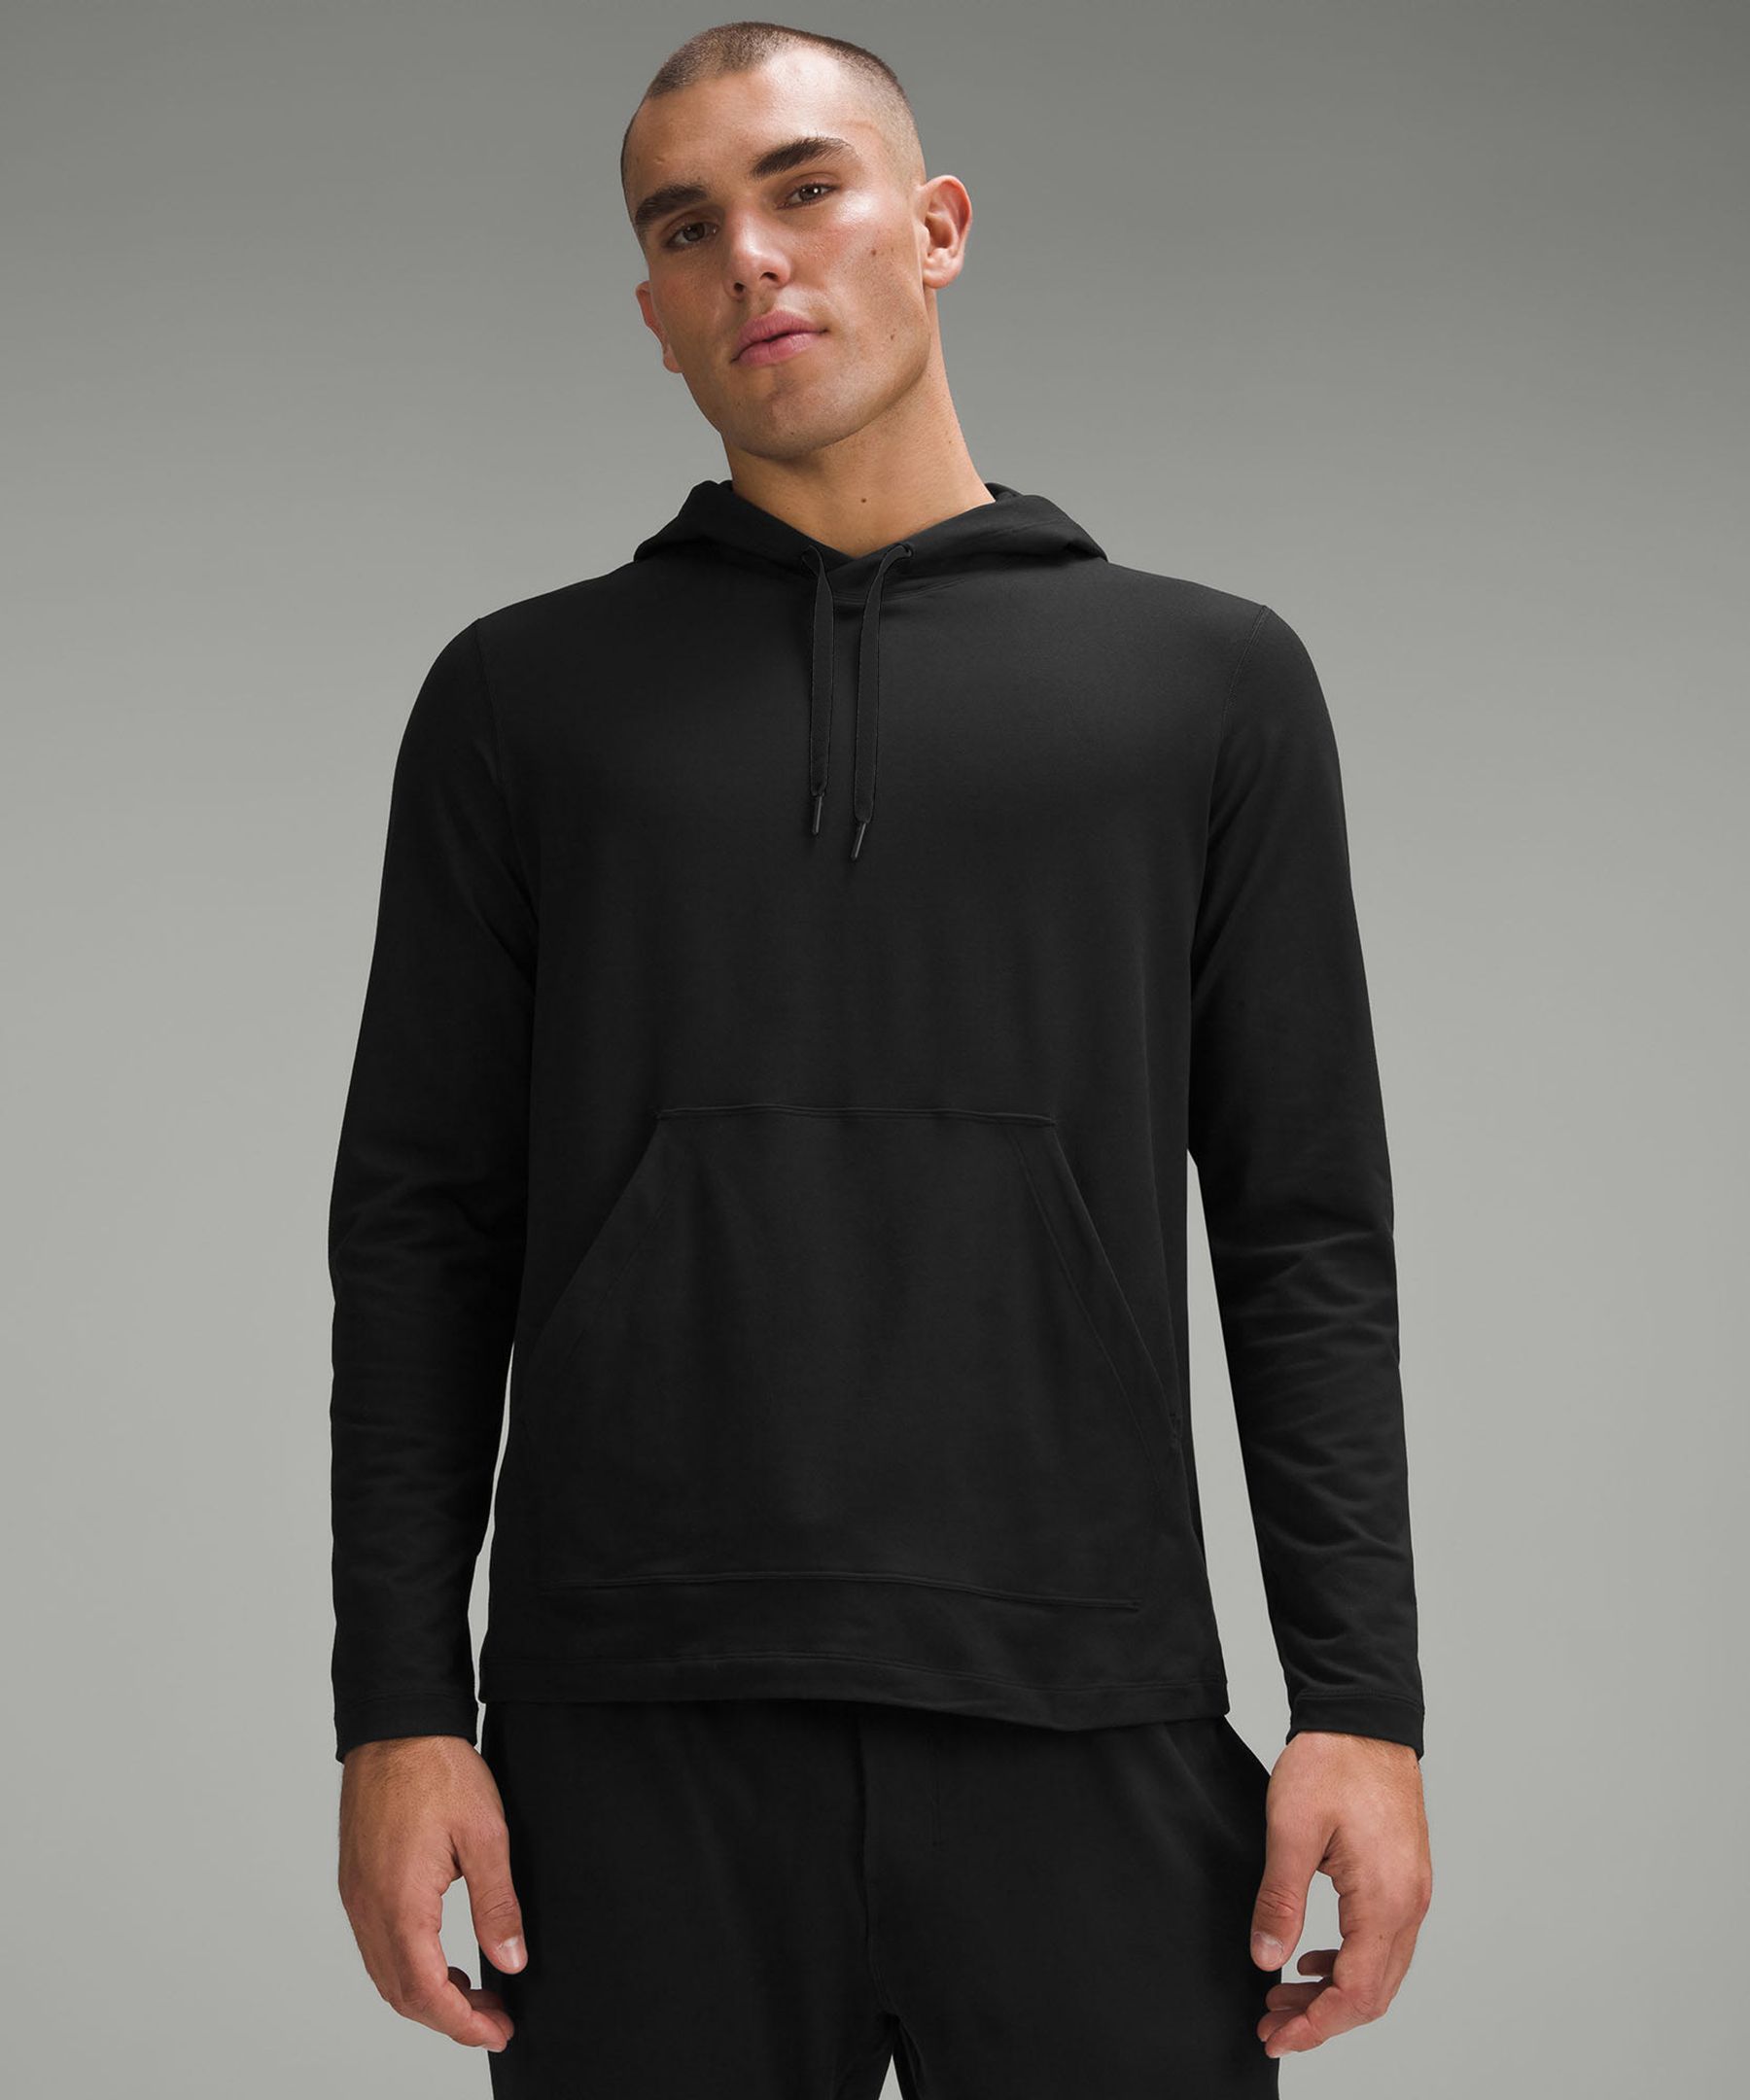 Soft Jersey Pullover Hoodie, Men's Long Sleeve Shirts